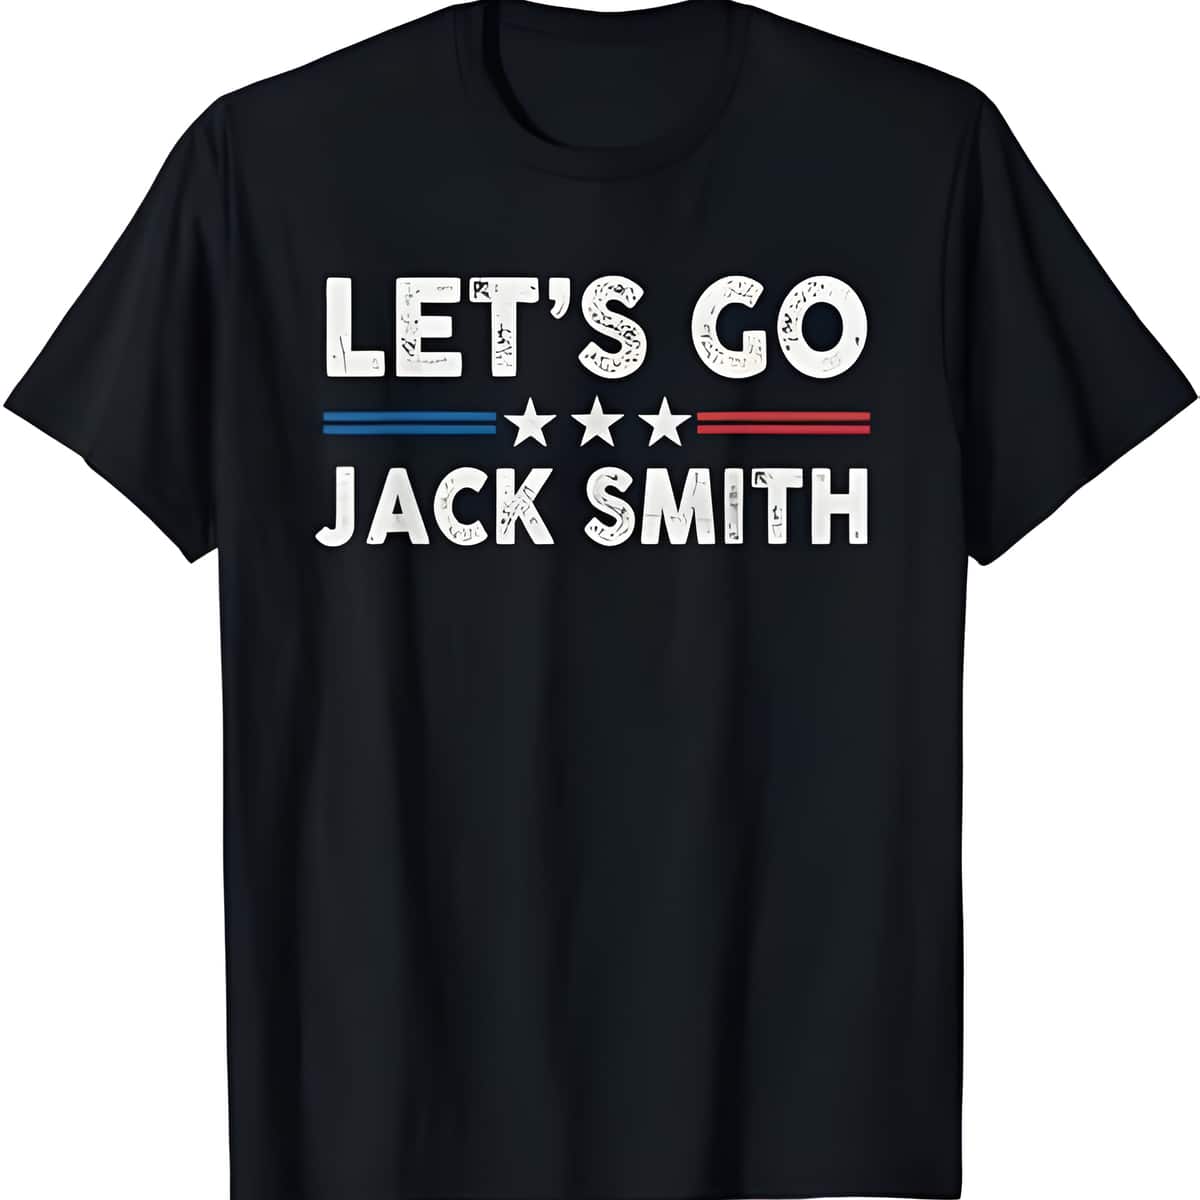 Let's Go Jack Smith T-Shirt